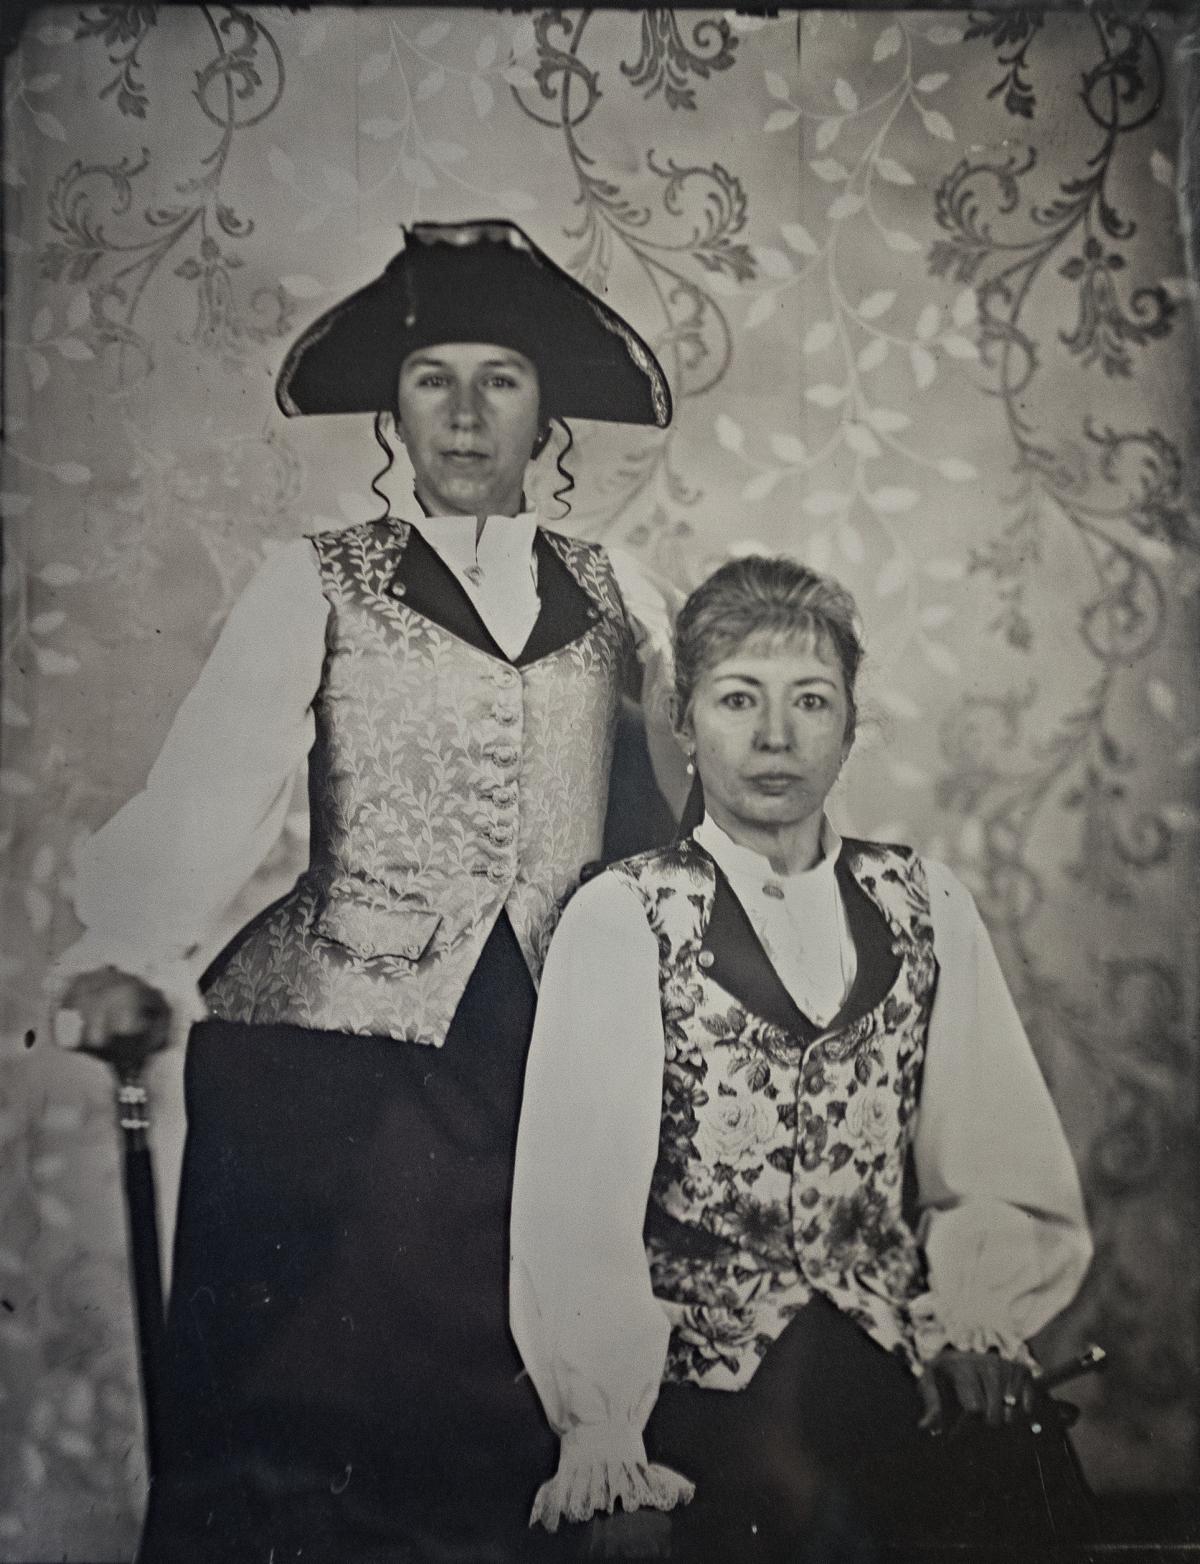 Wetplate Photography